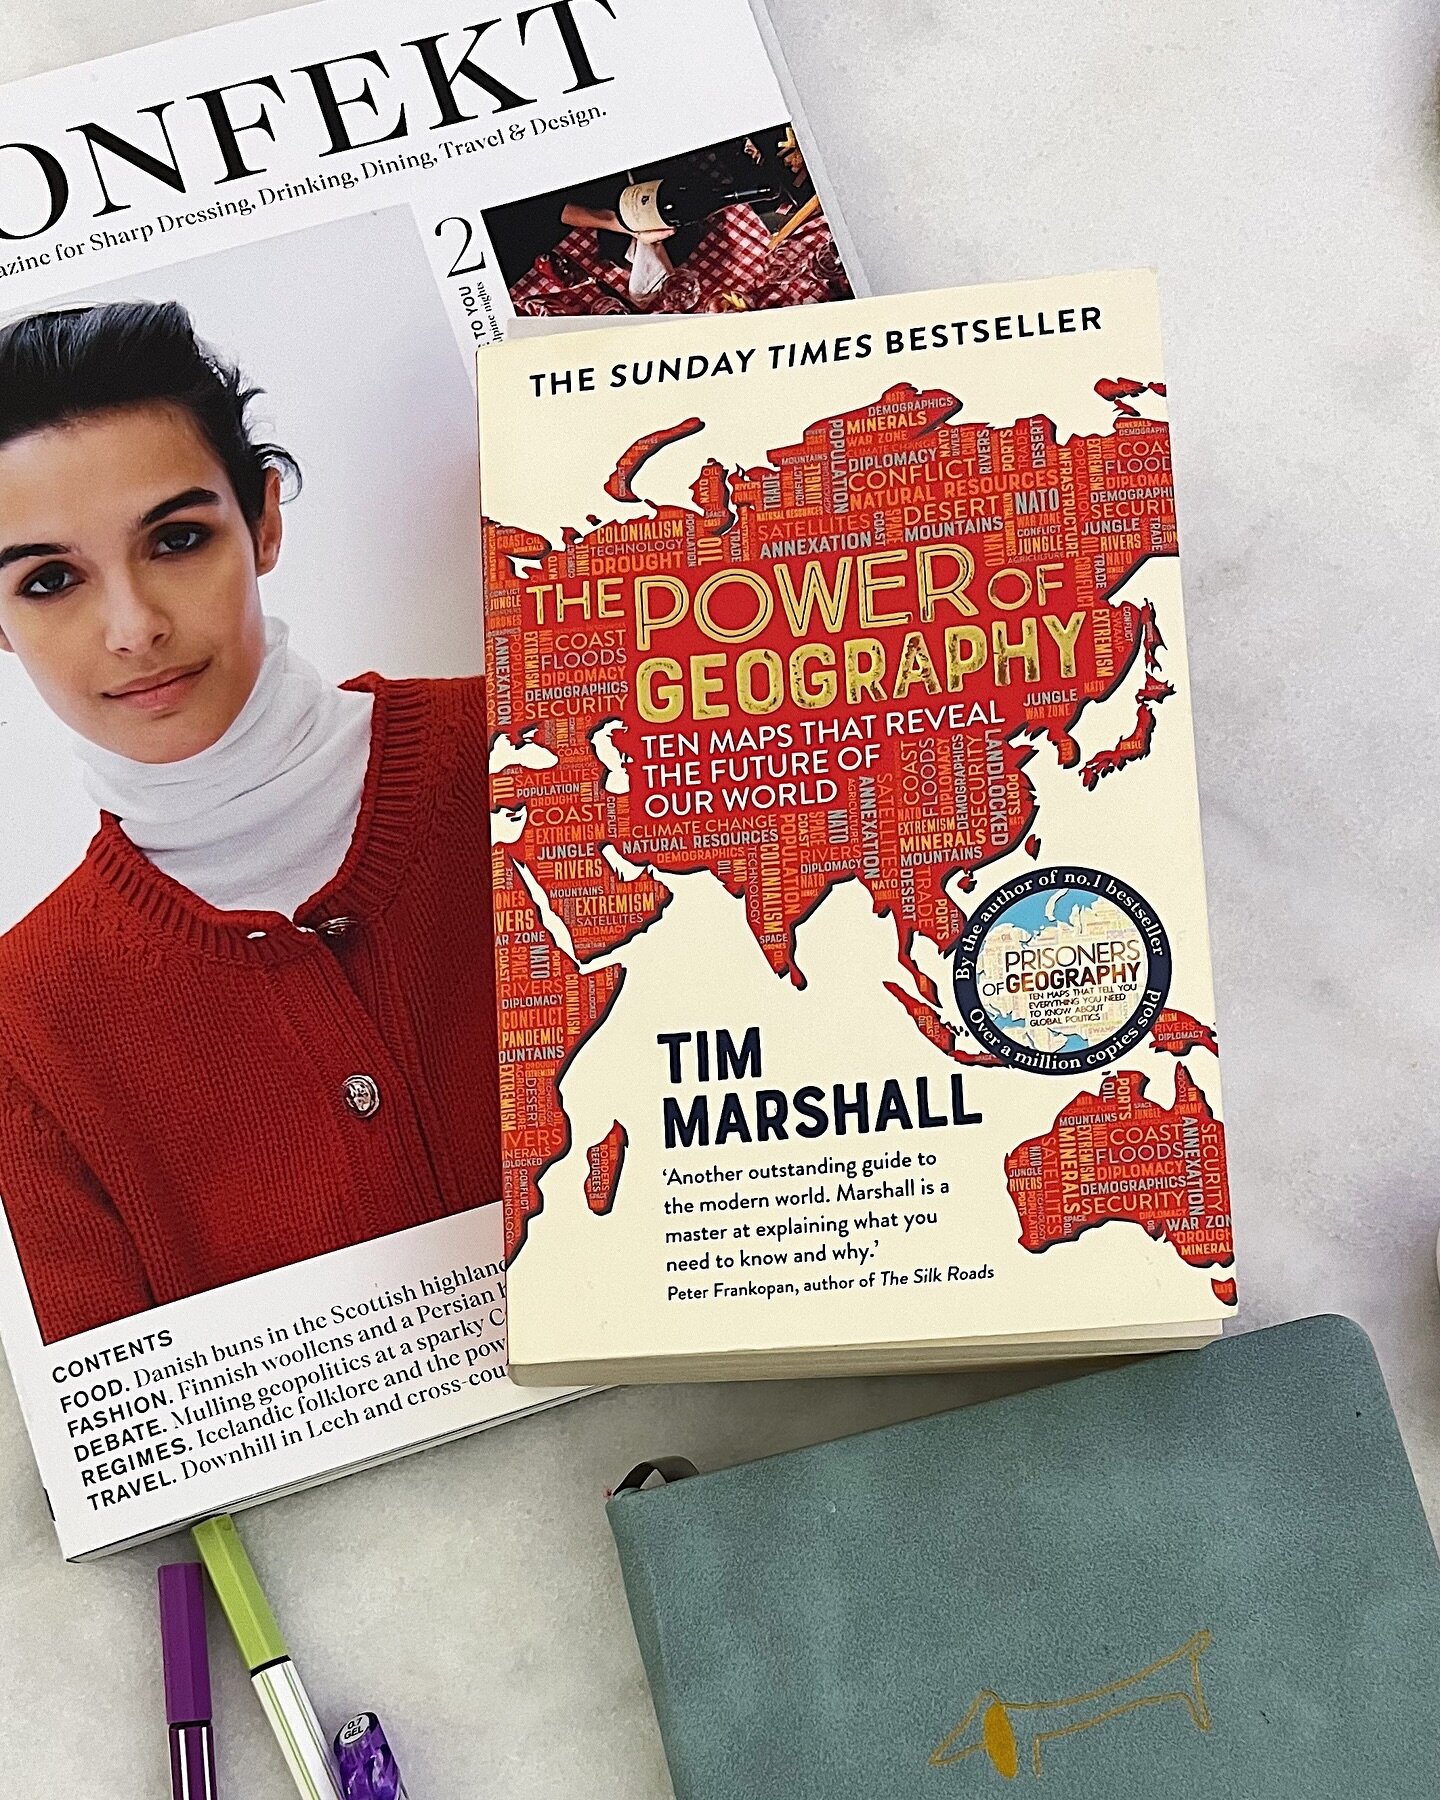 🌍Thoroughly enjoyed this book. I have a penchant for geography and geopolitics, and I&rsquo;m wondering: How can I turn this into an actual *hobby*, beyond just reading books/traveling or educating myself? 😅 Please send your ideas my way.

Oh, and 